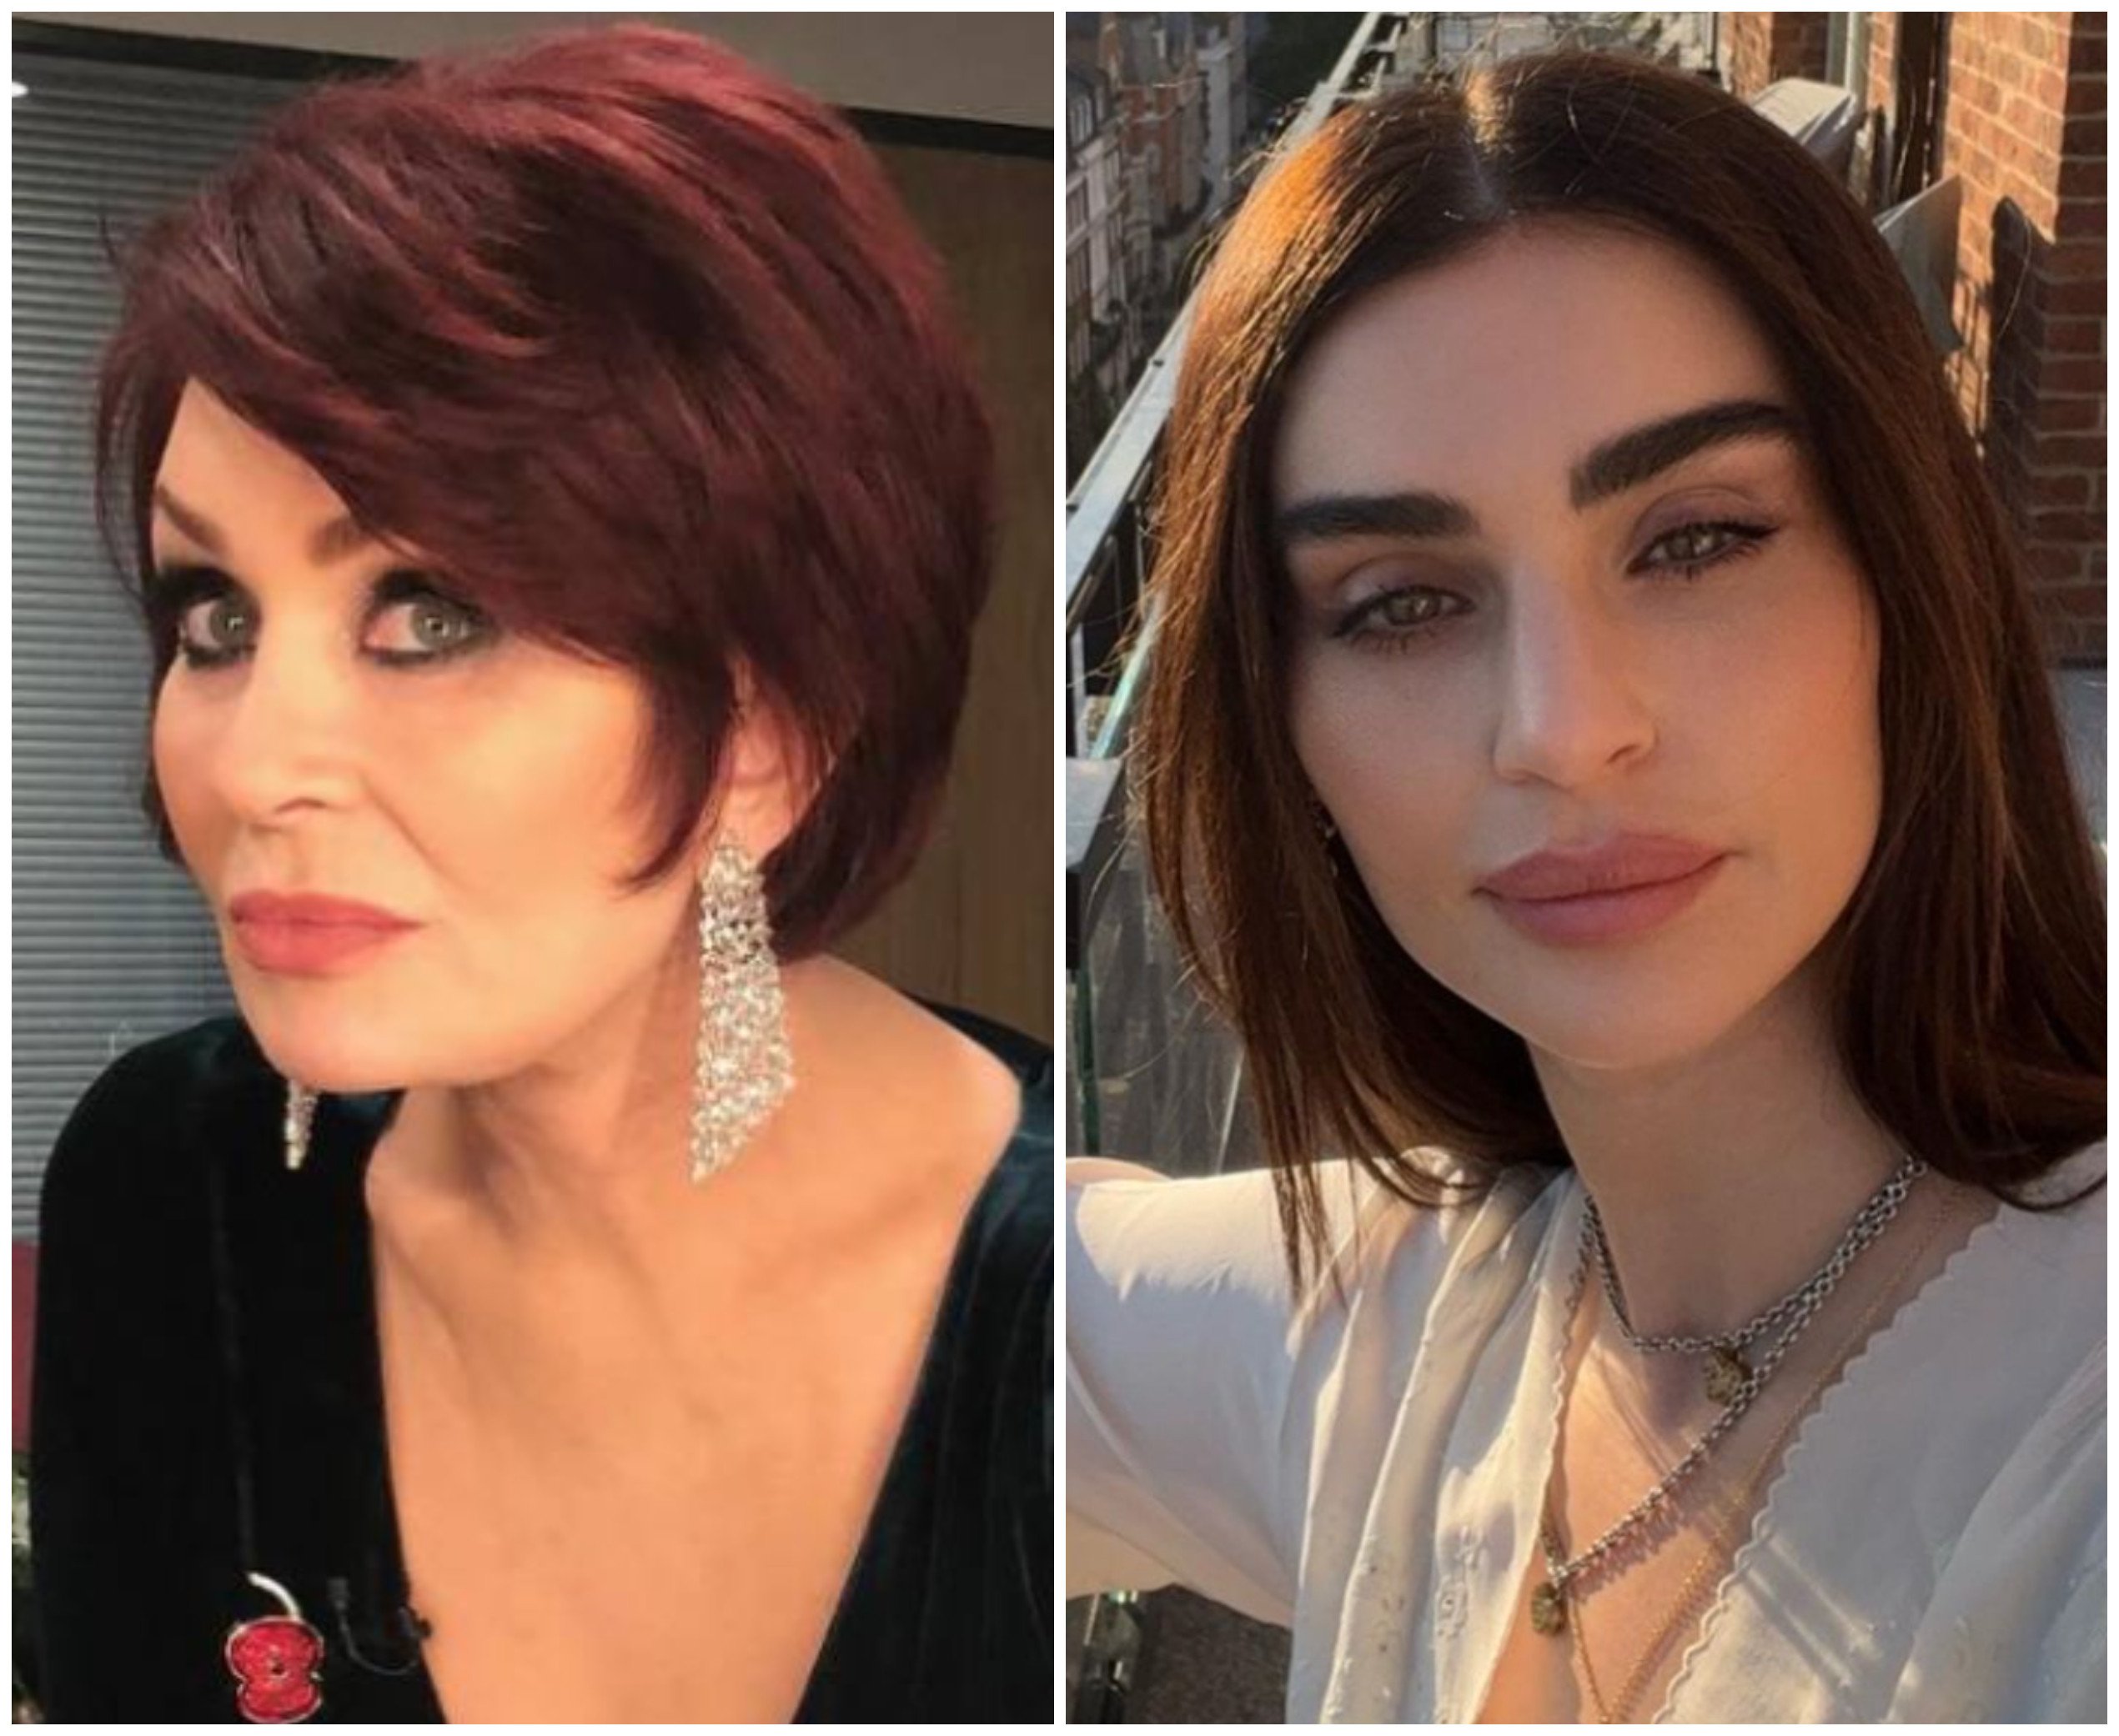 Aimee Osbourne (right) is also a daughter of Sharon Osbourne (left) ... but she’s not as high profile as her more famous siblings. Photos: @sharonosborne, ro_officialmusic/Instagram